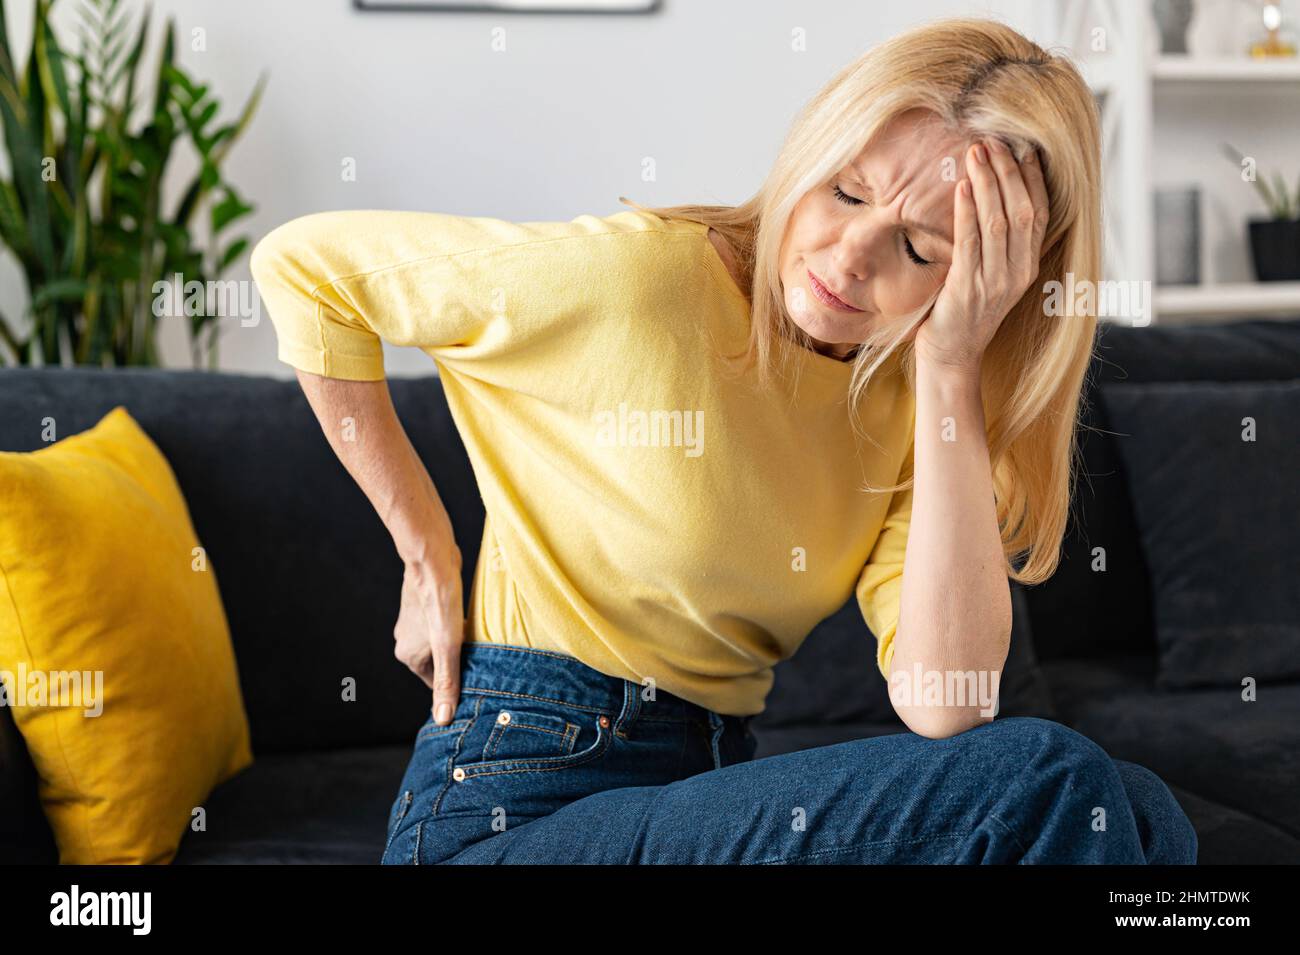 Blonde-haired woman felt a sharp pain in loin sitting on the sofa at home, worried caucasian lady holding a hand on the lower back with suffering face expression Stock Photo